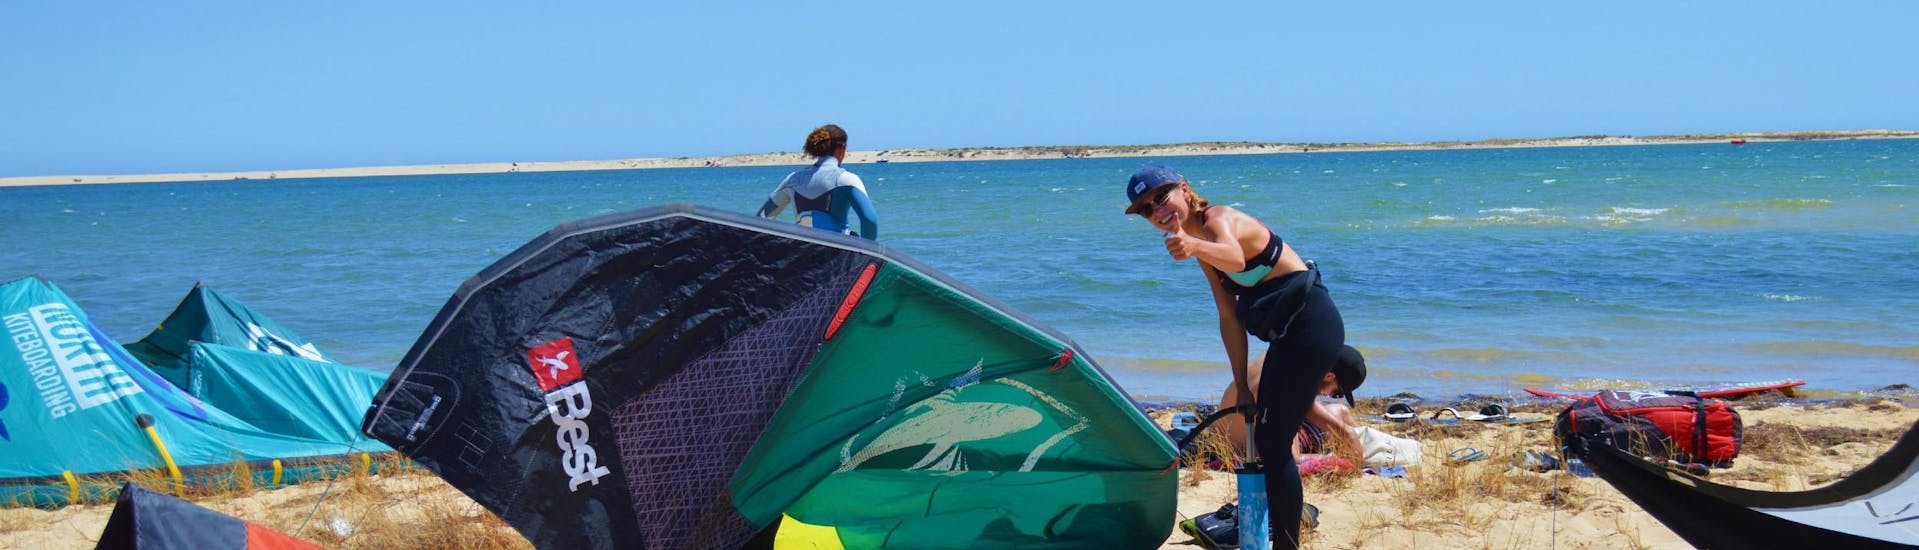 A participants of the kitesurfing lessons with Kite Culture Algarve is getting ready for her session on the Fuseta Lagoon.